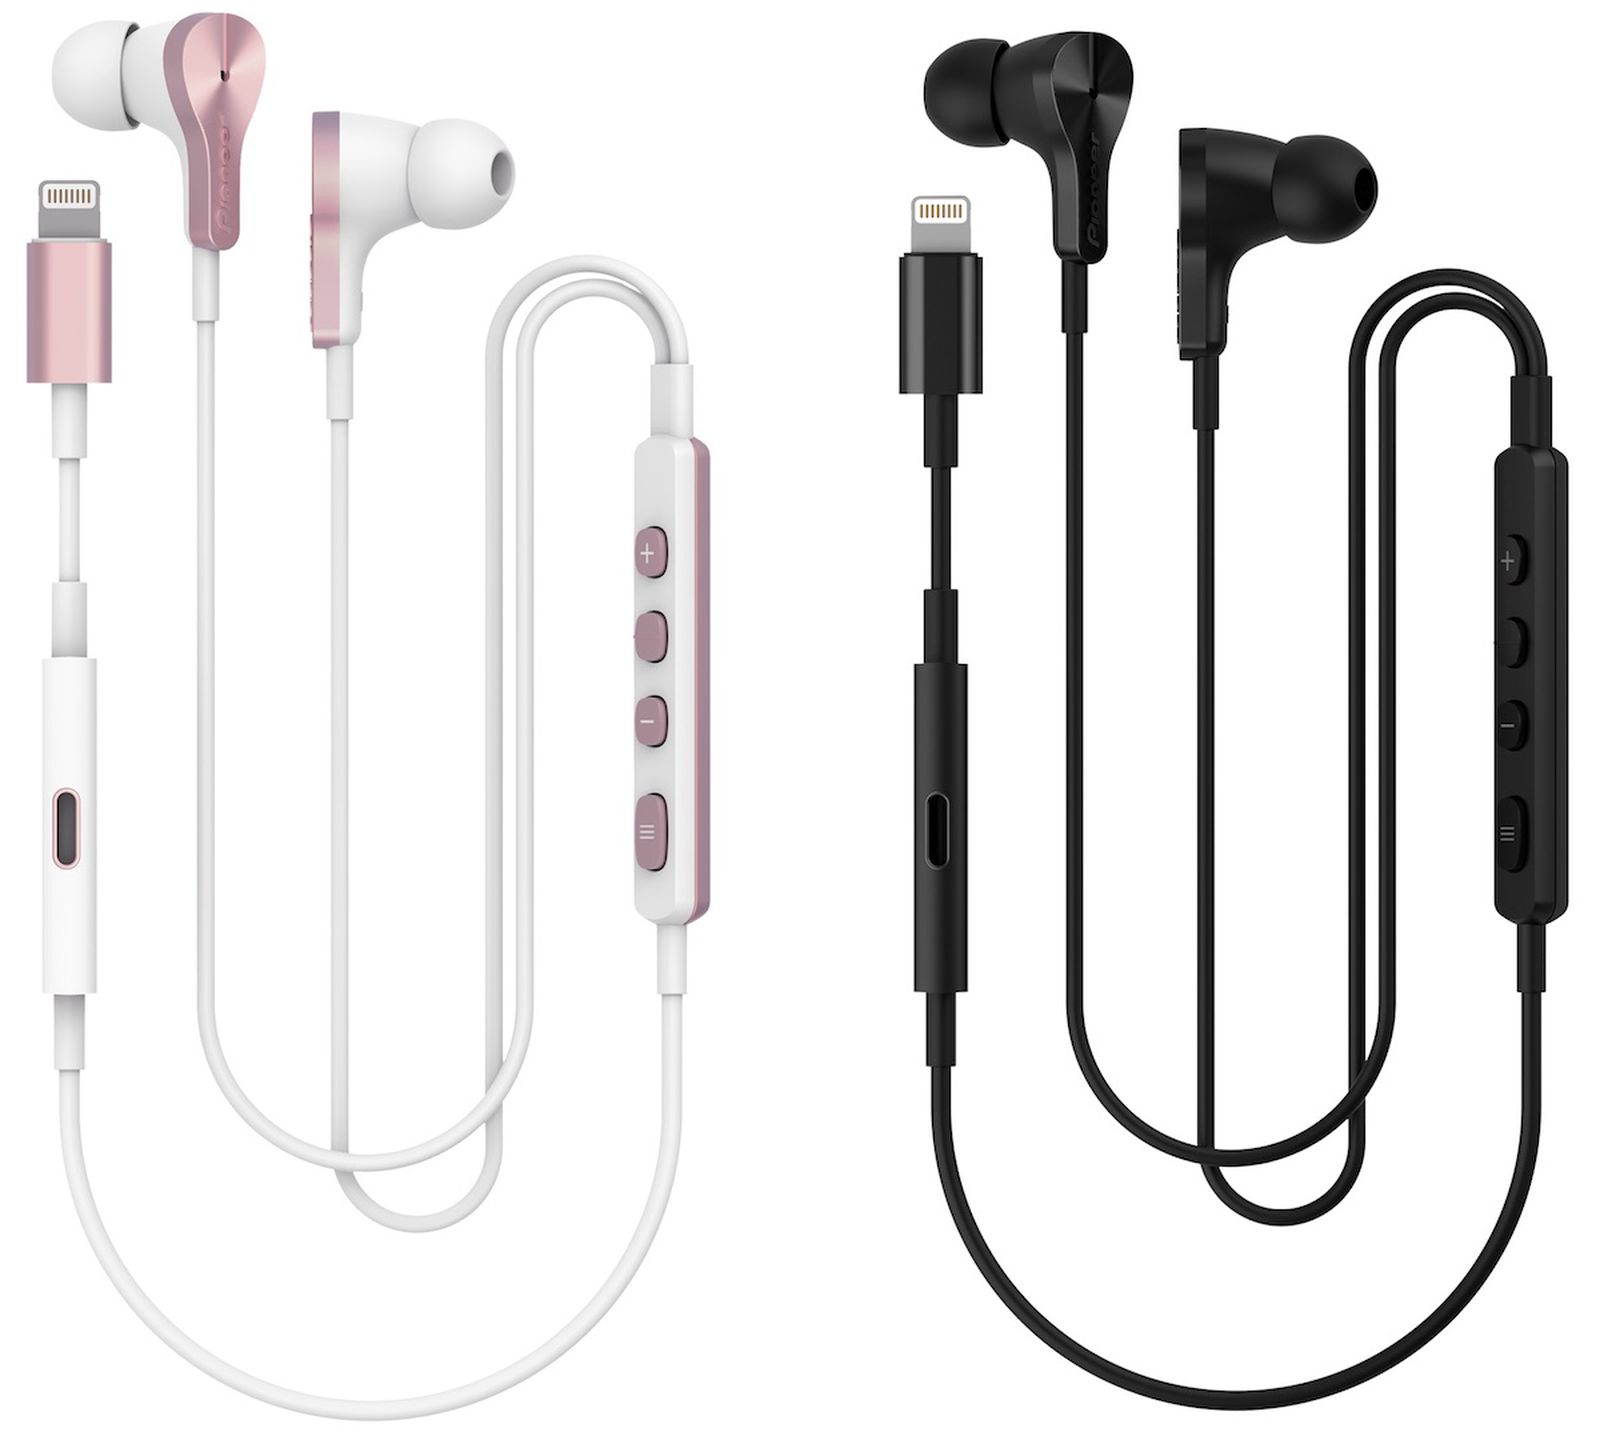 Rayz Plus Lightning Earphones Gain Smart Mute Feature And Exclusive Colors At Apple Stores Macrumors